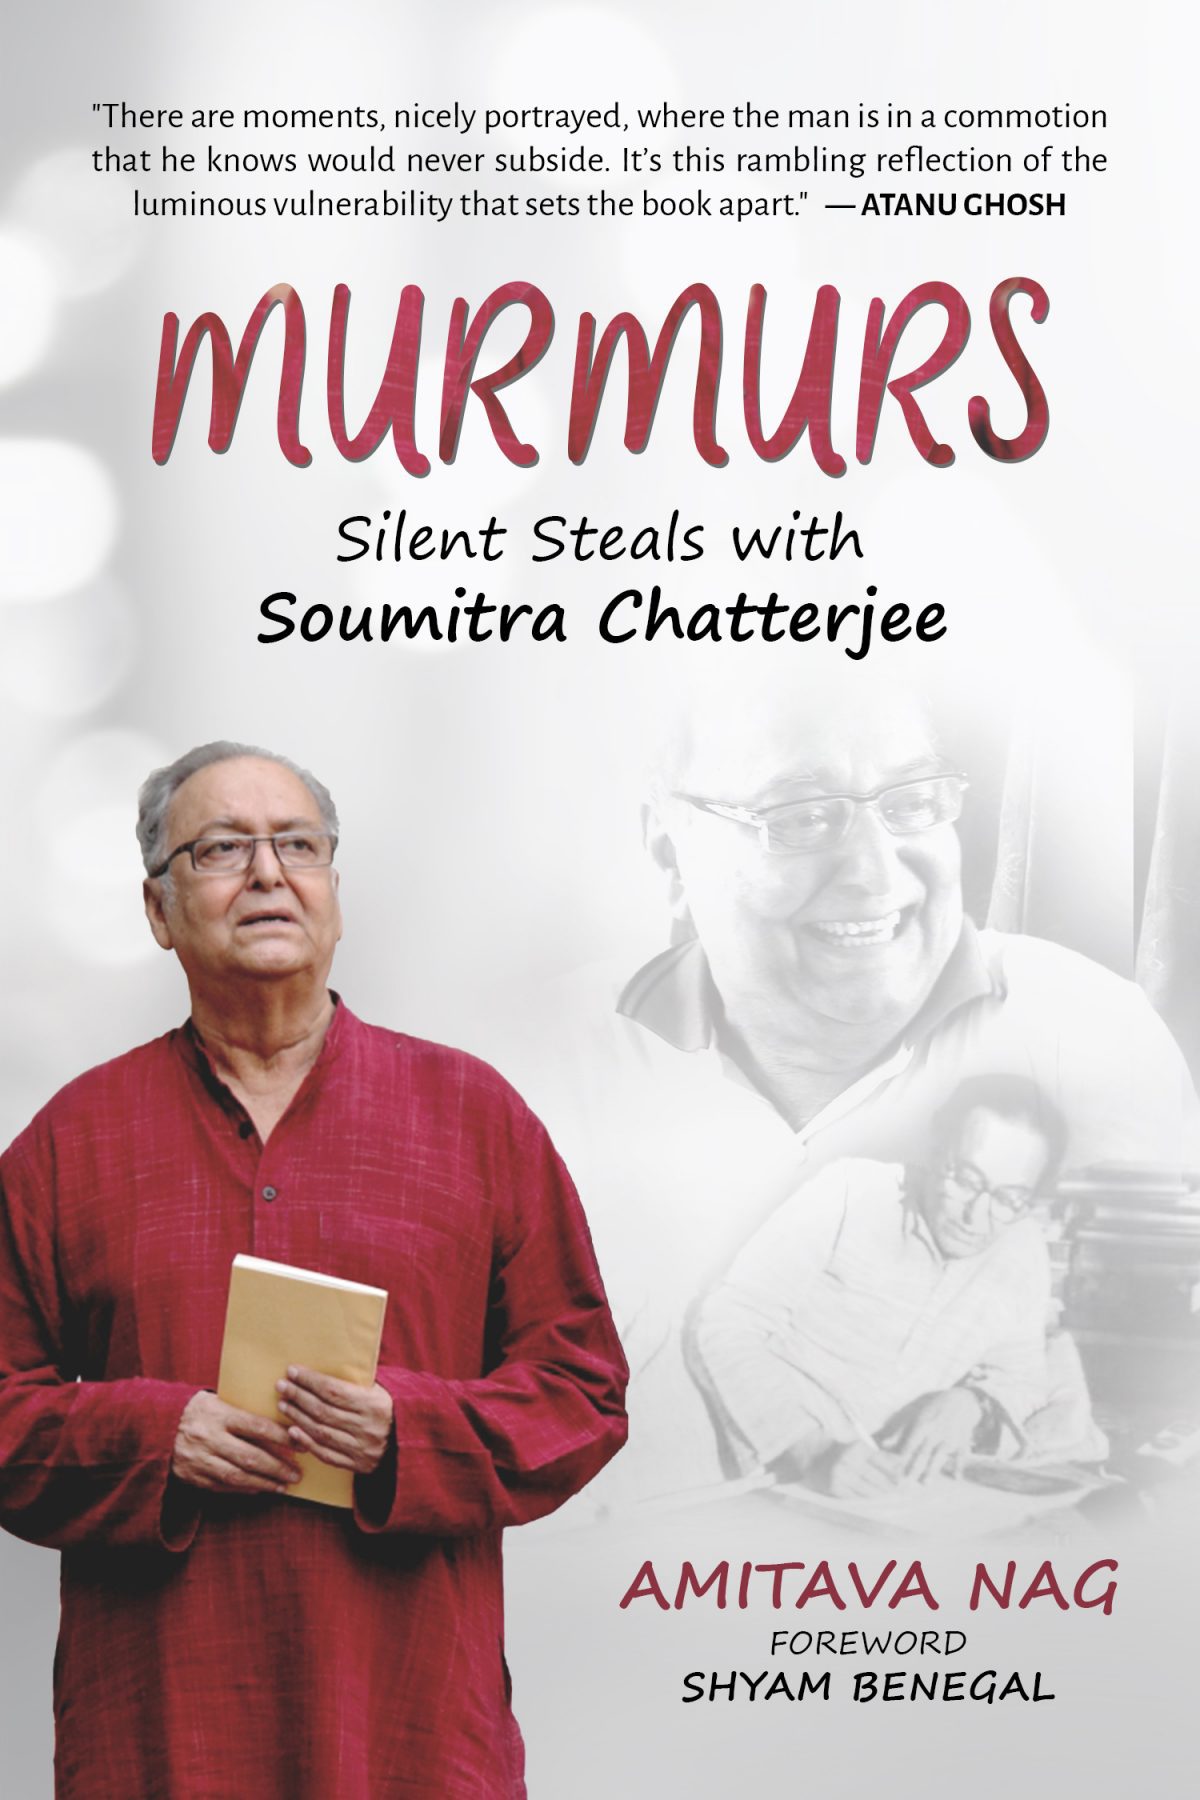 MURMURS - Silent Steals with Soumitra Chatterjee